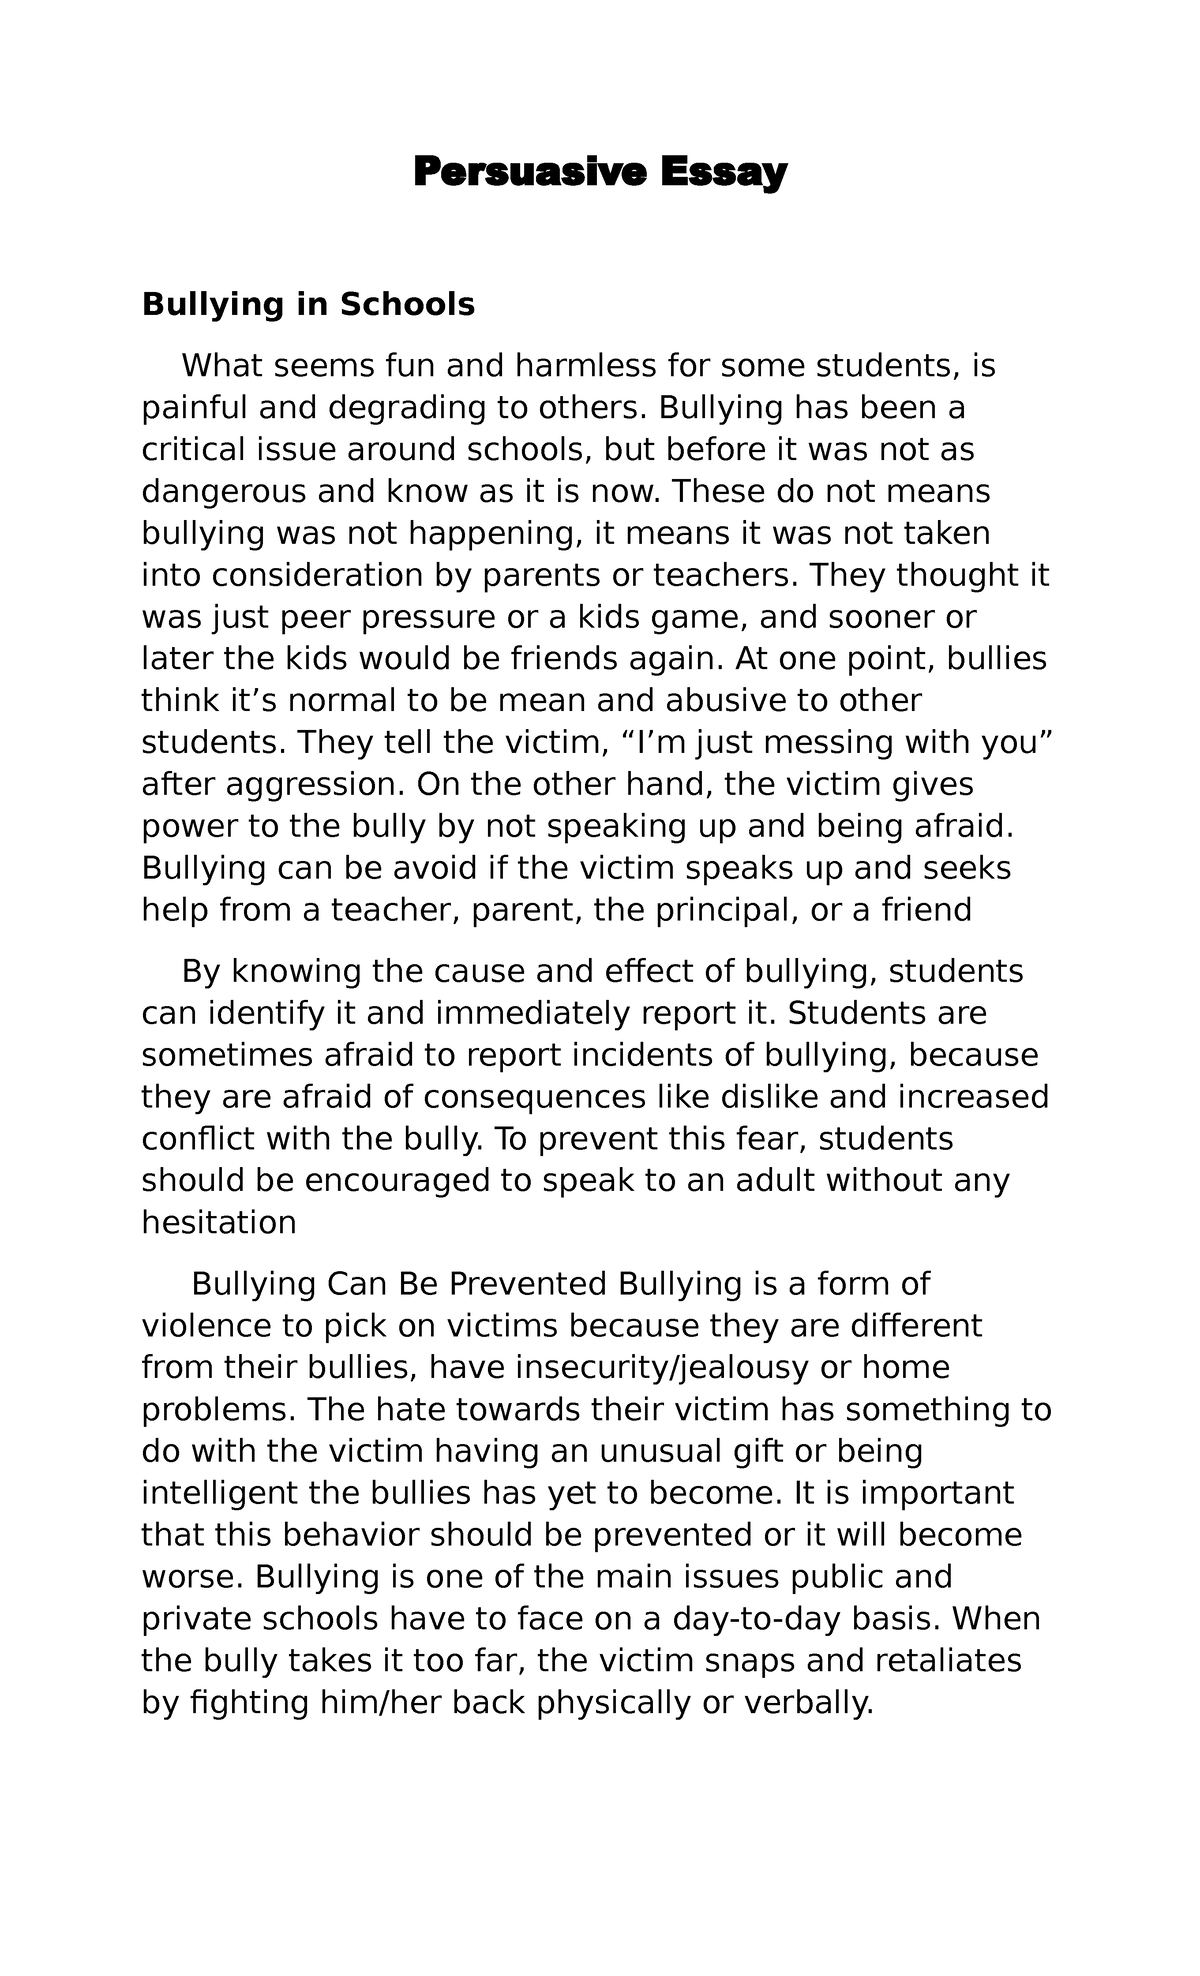 5 paragraph persuasive essay on bullying